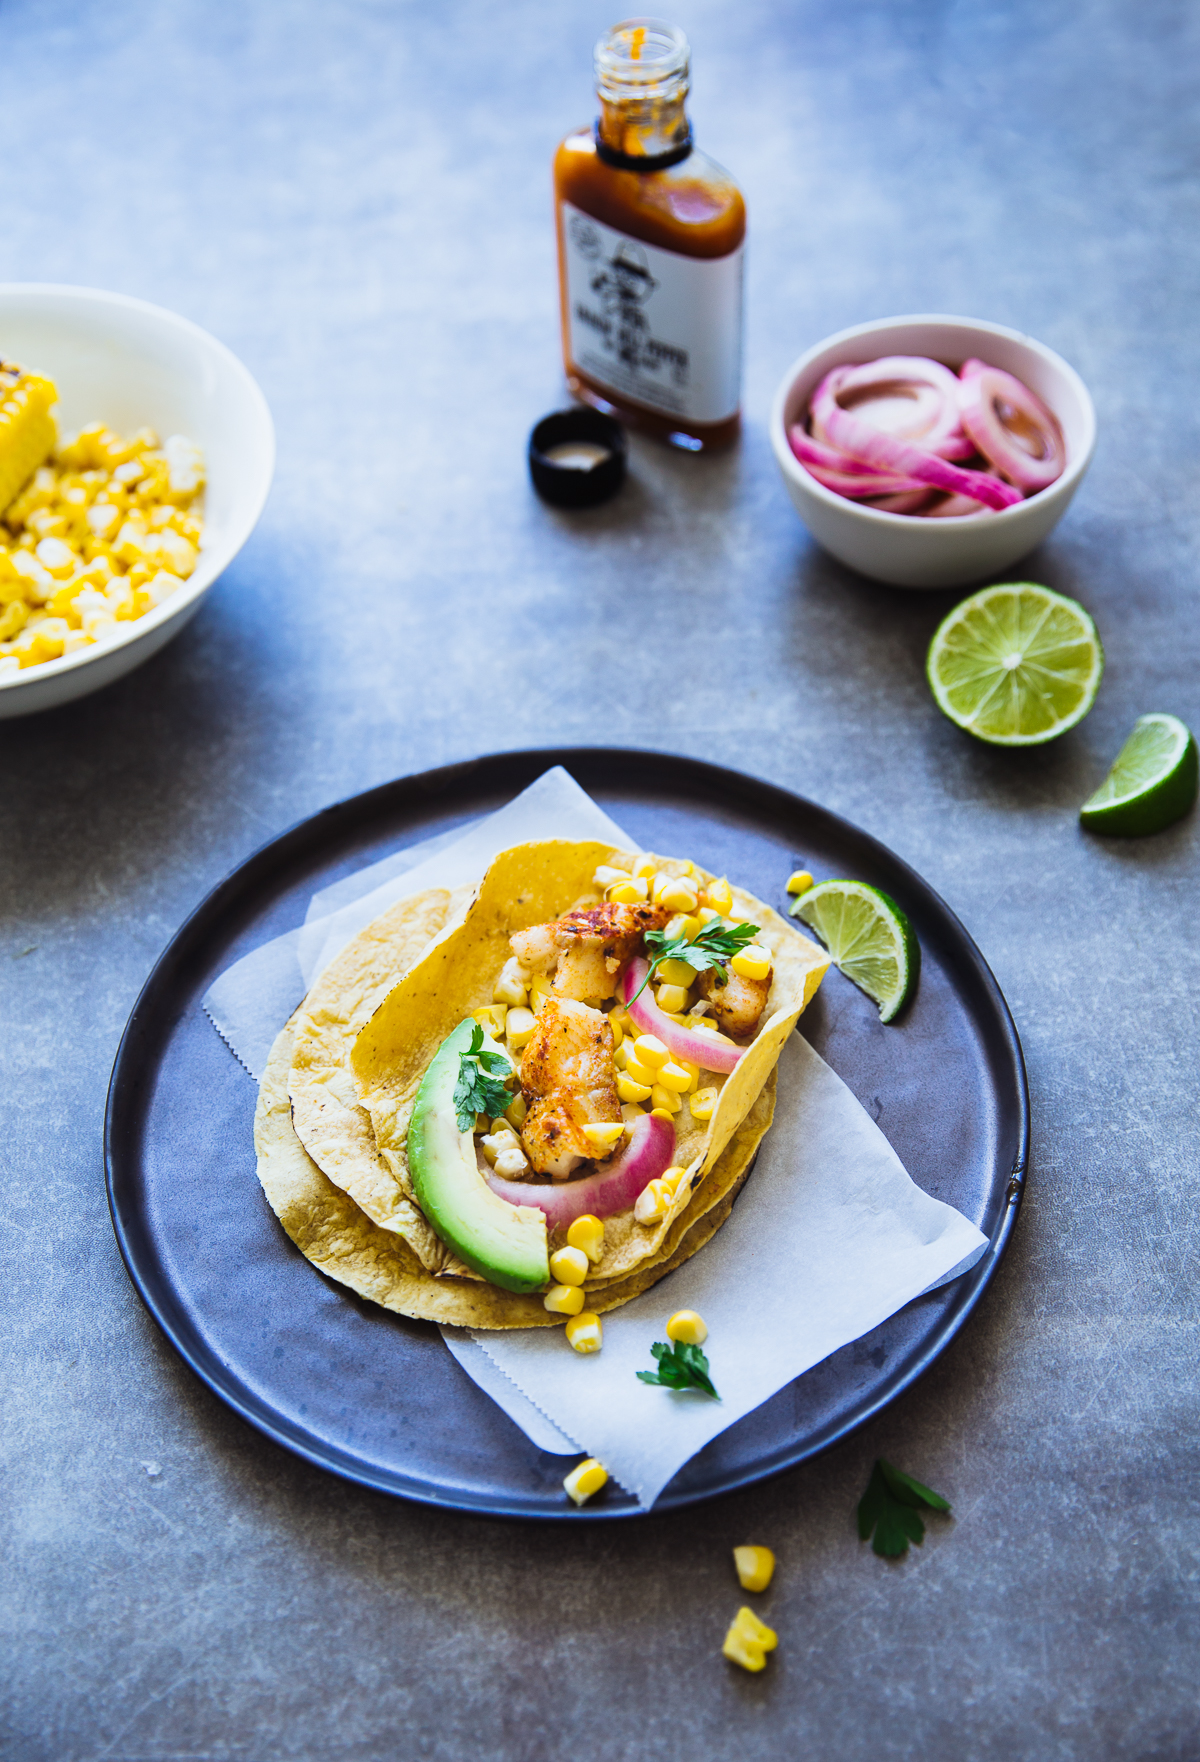 Fish tacos with grilled corn and avocado | The All-Day Kitchen